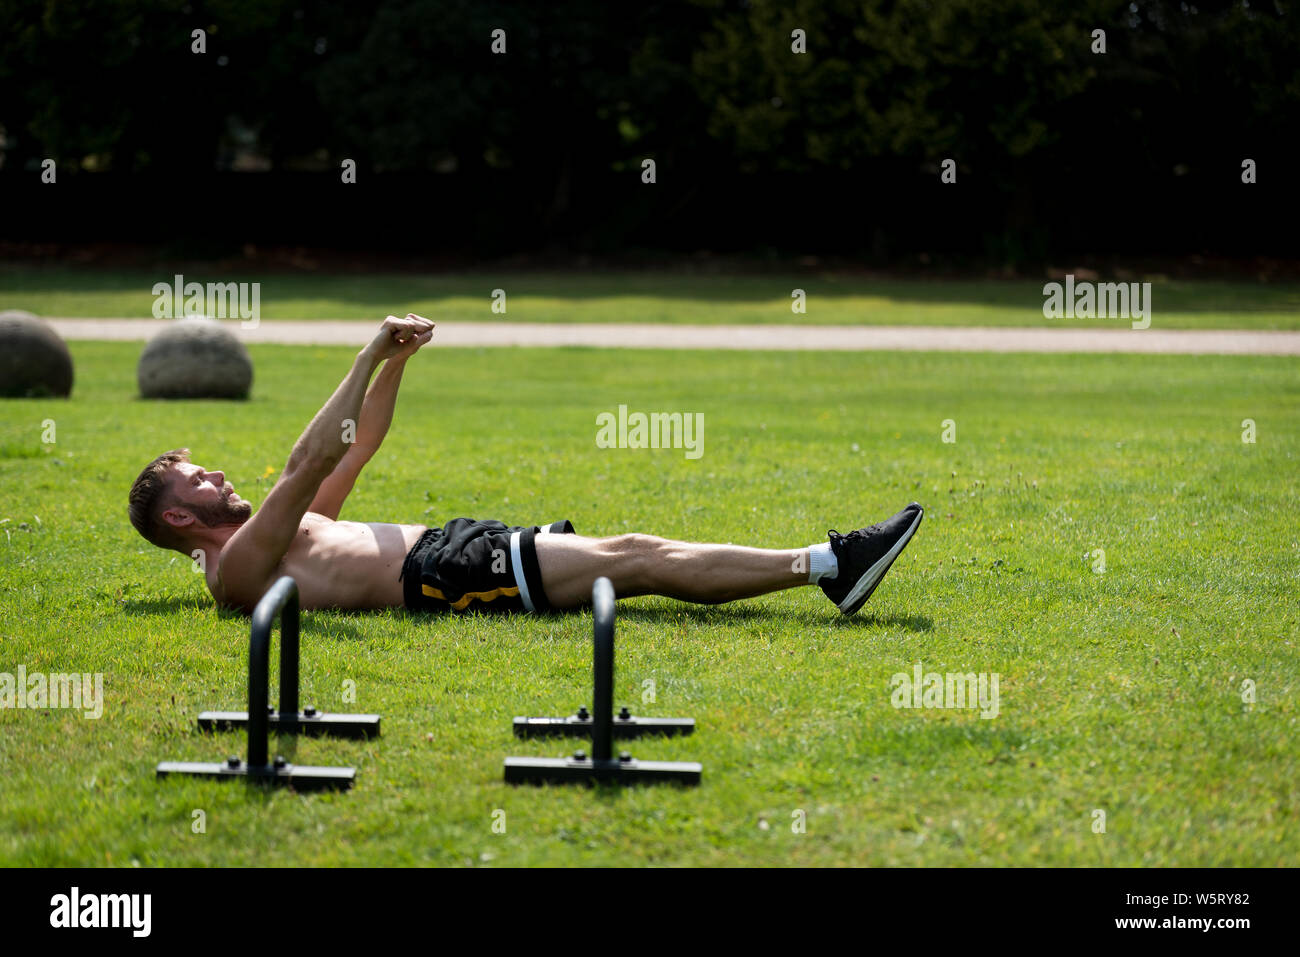 Man performing warm up before doing calisthenics fitness workout in an ...